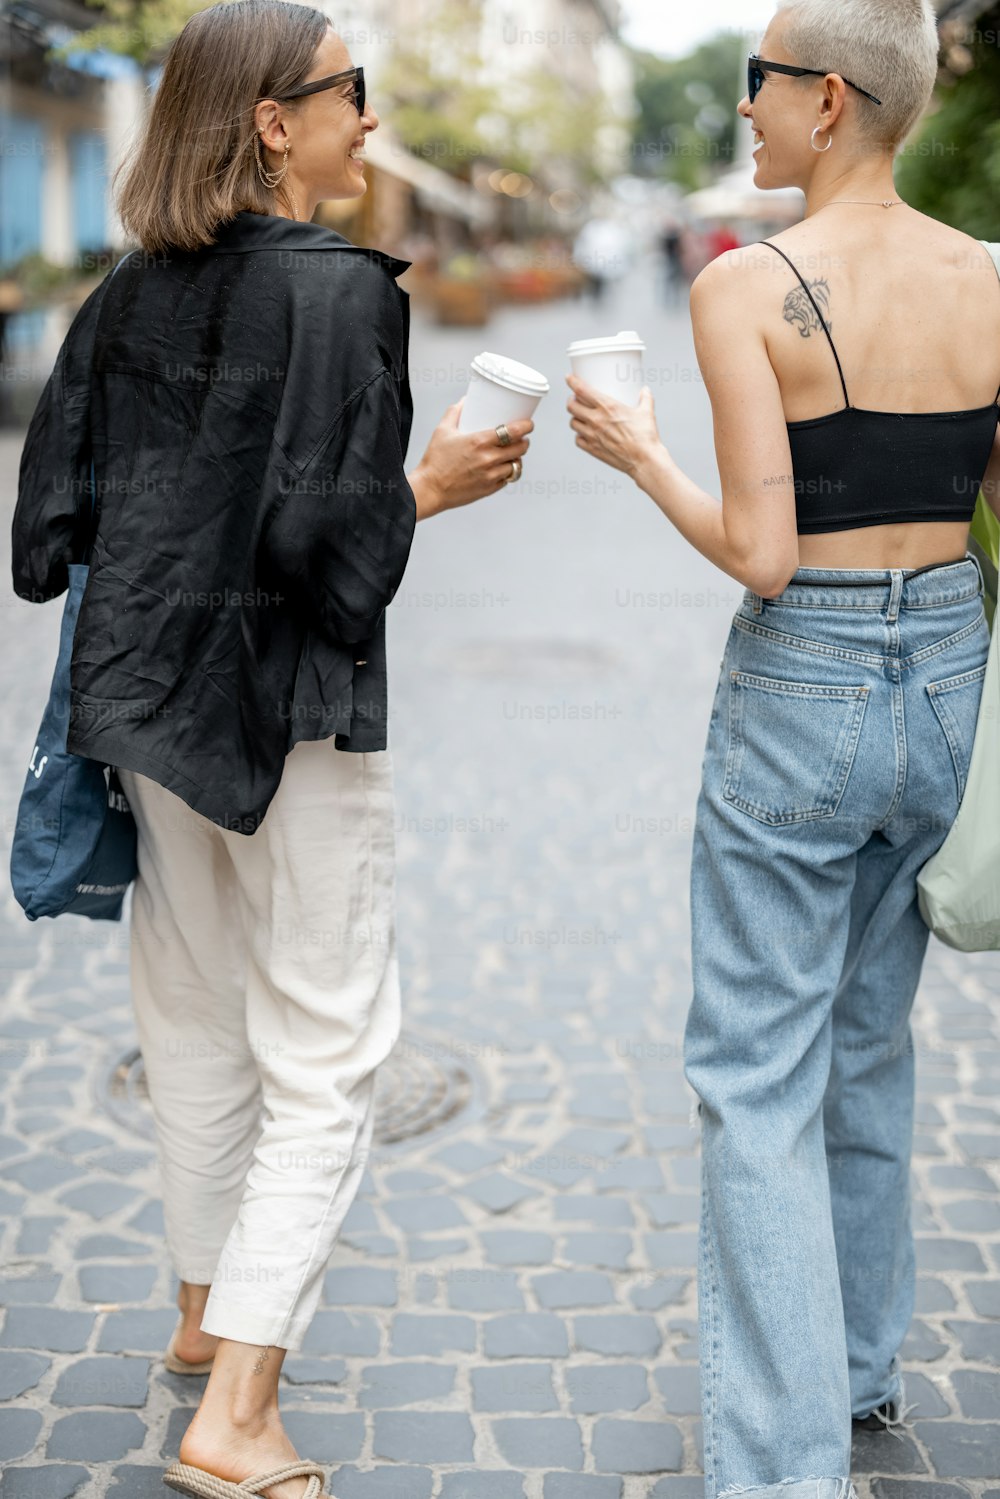 Stylish lesbian couple walking the street and holding hands together. View from the backside. Street fashion and lifestyle, homosexual relations